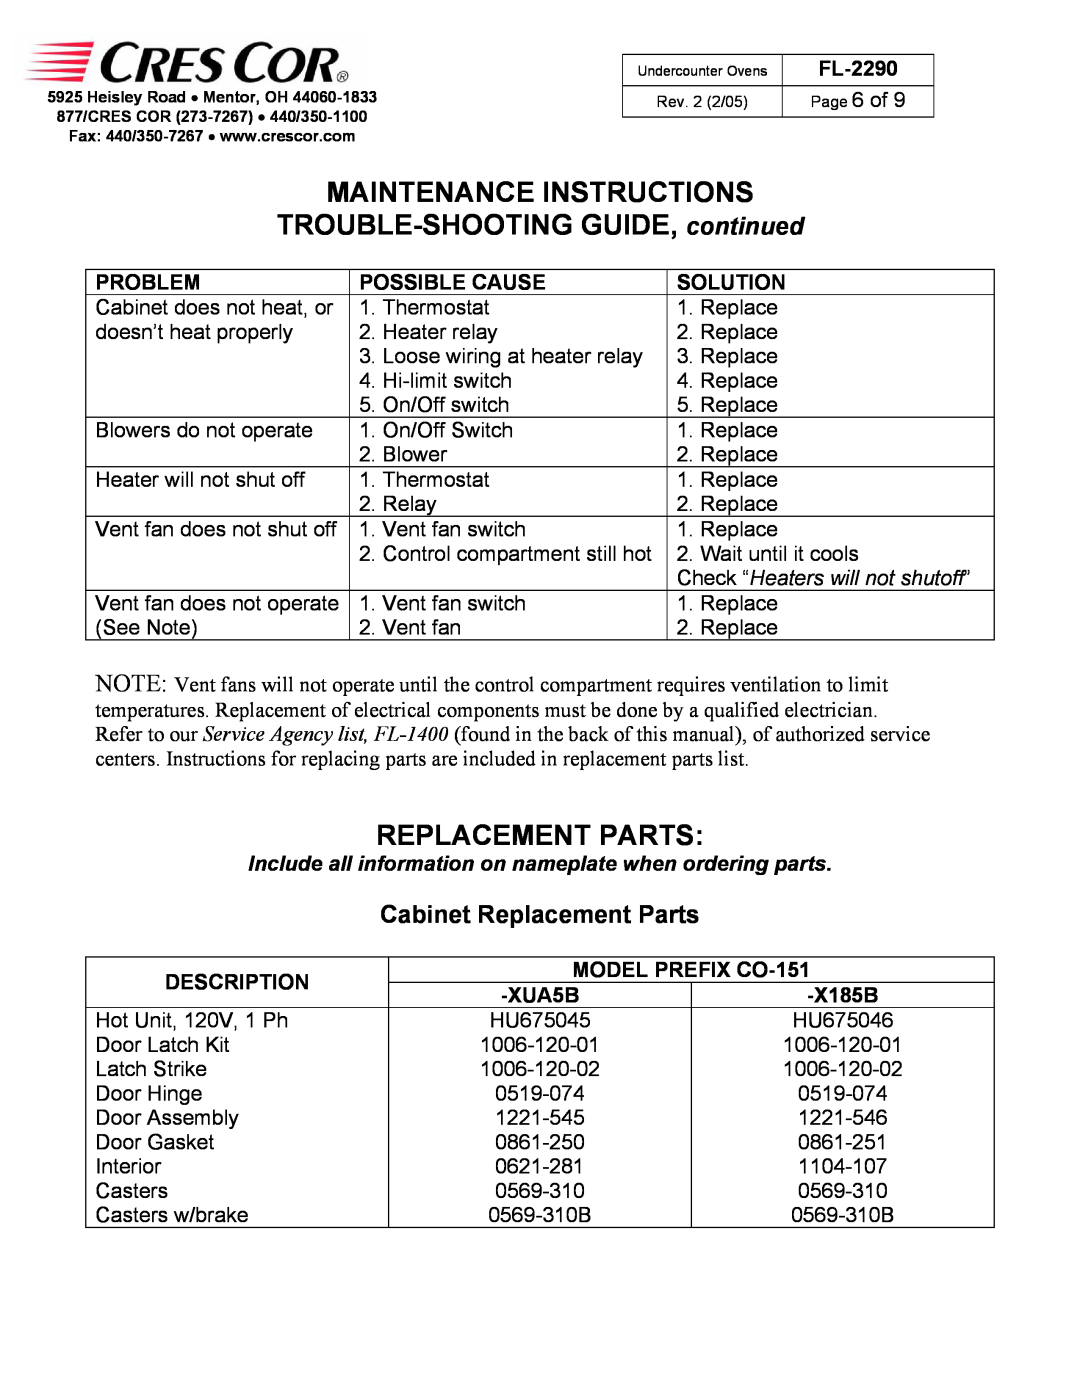 Cres Cor CO151X185B Maintenance Instructions, TROUBLE-SHOOTINGGUIDE, continued, Replacement Parts, FL-2290, Problem, XUA5B 